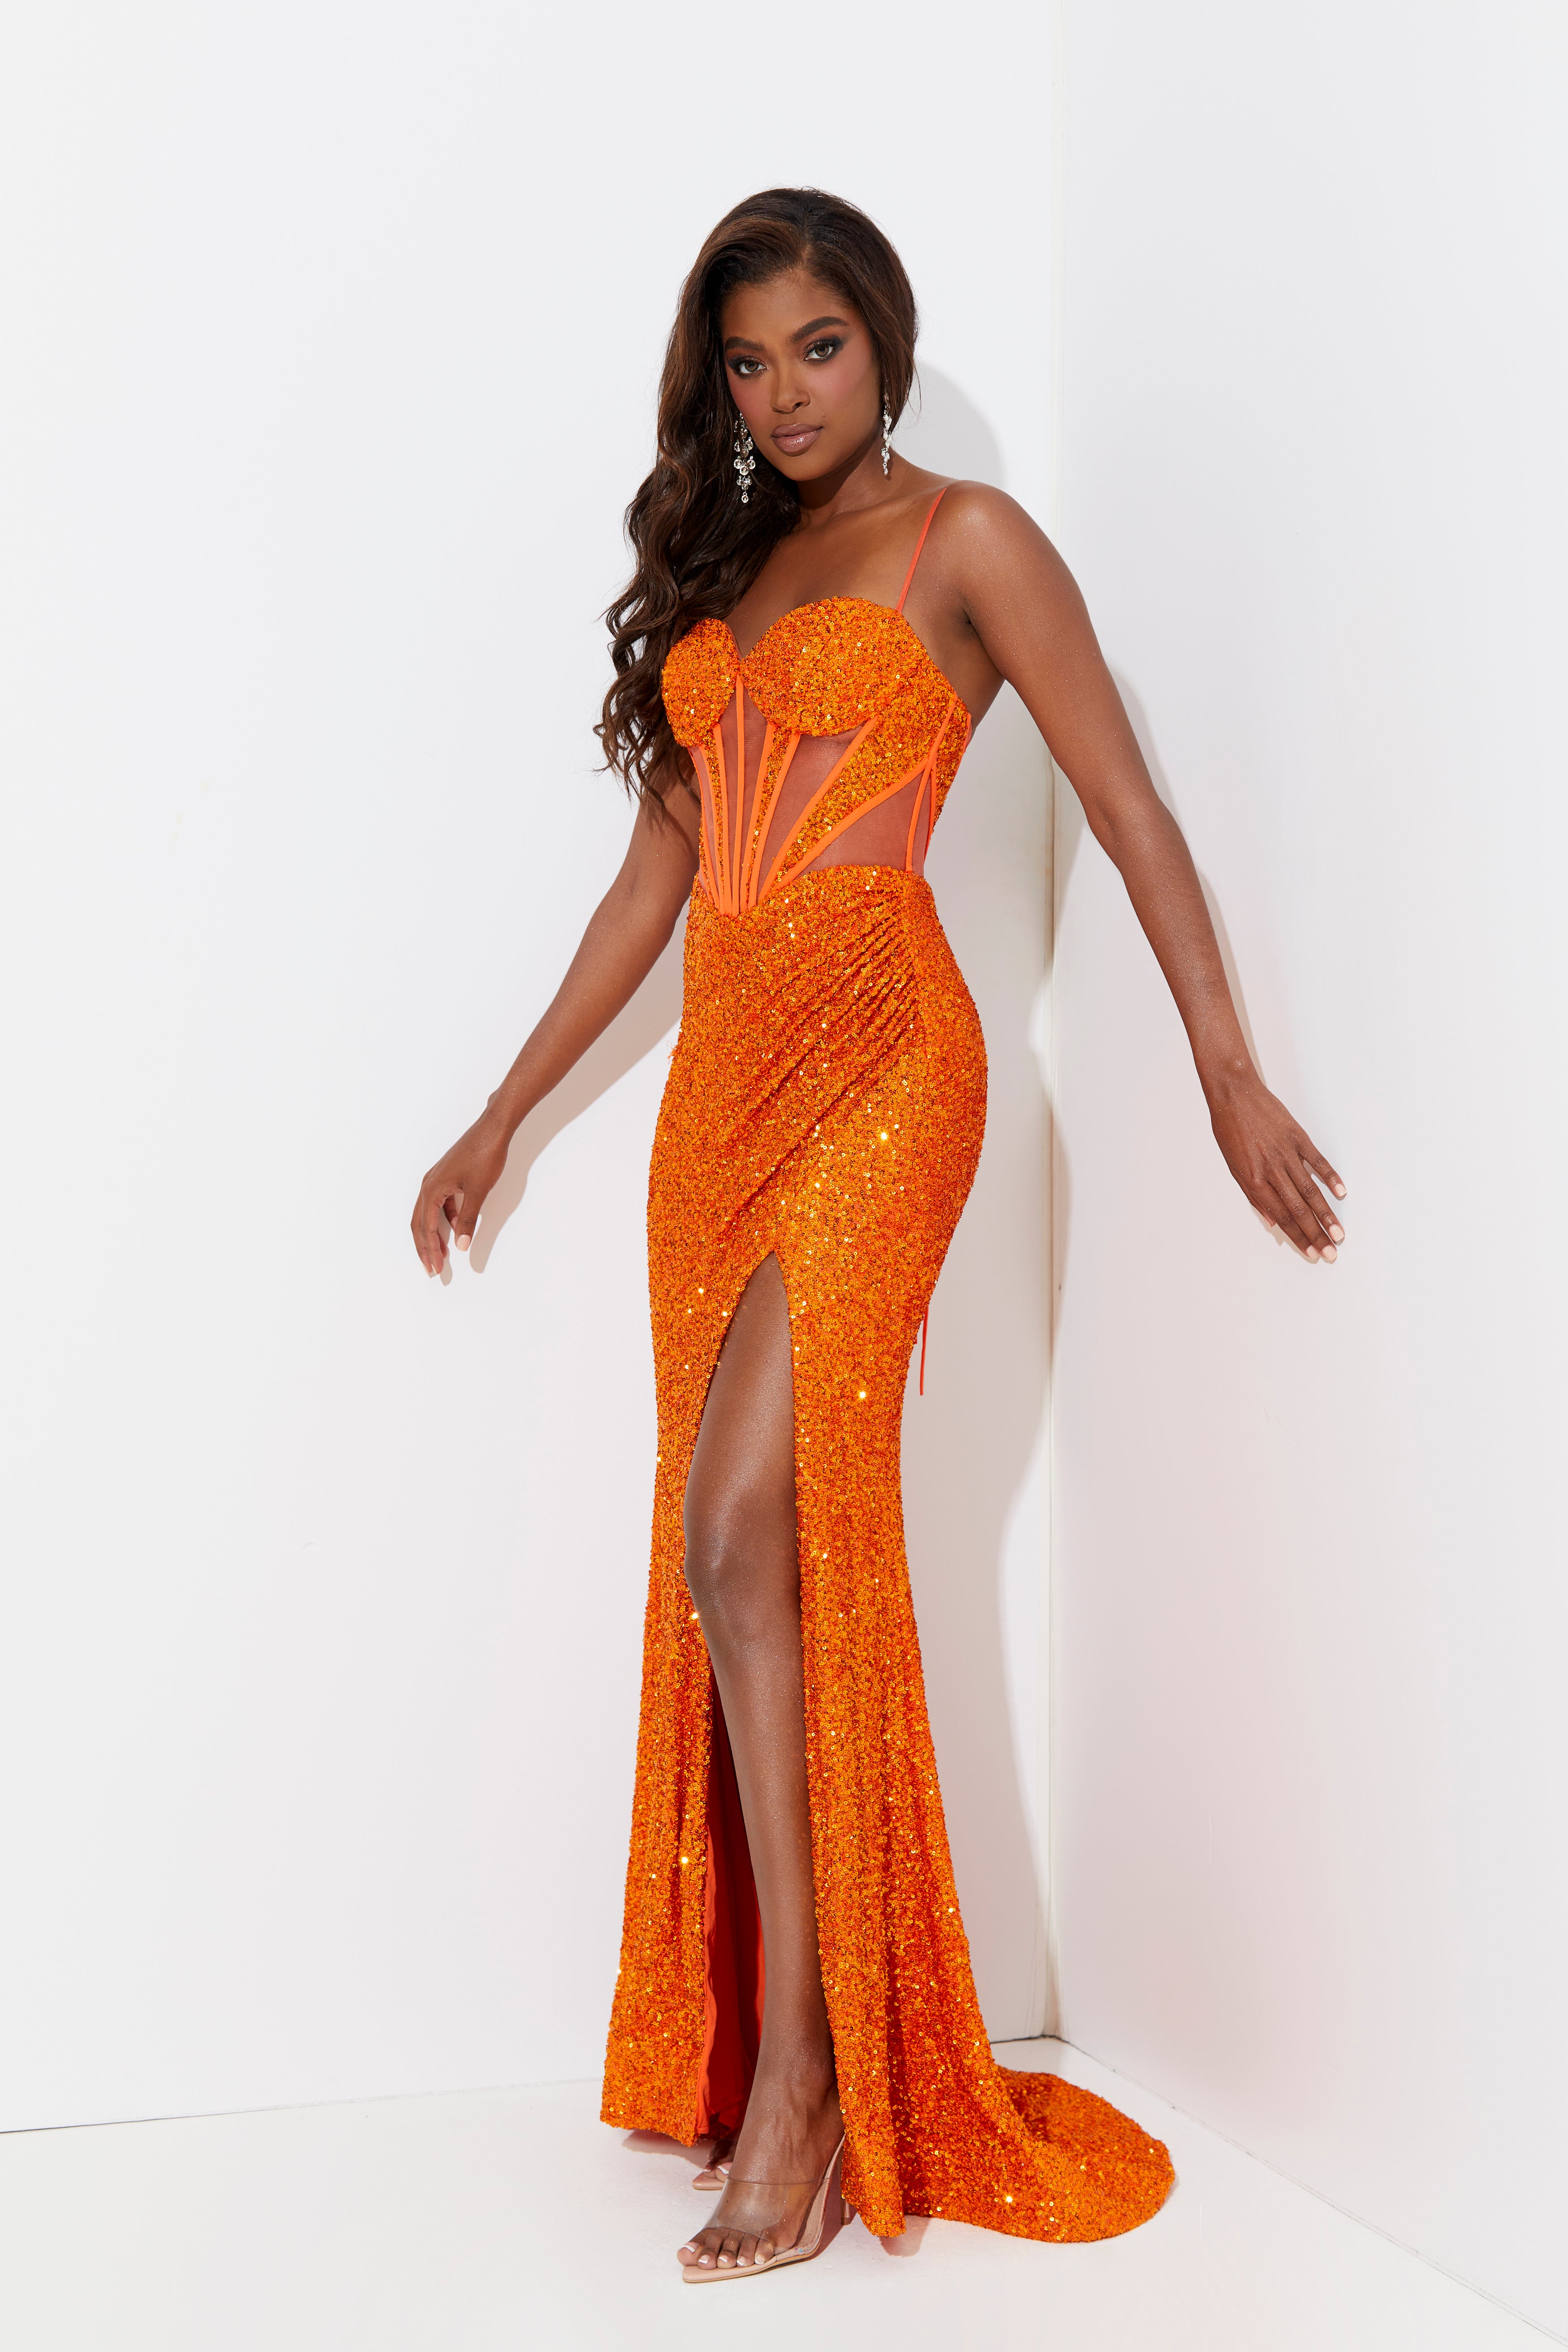 Miss Universe 2023 Evening Gown Competition Photos: The Best Looks